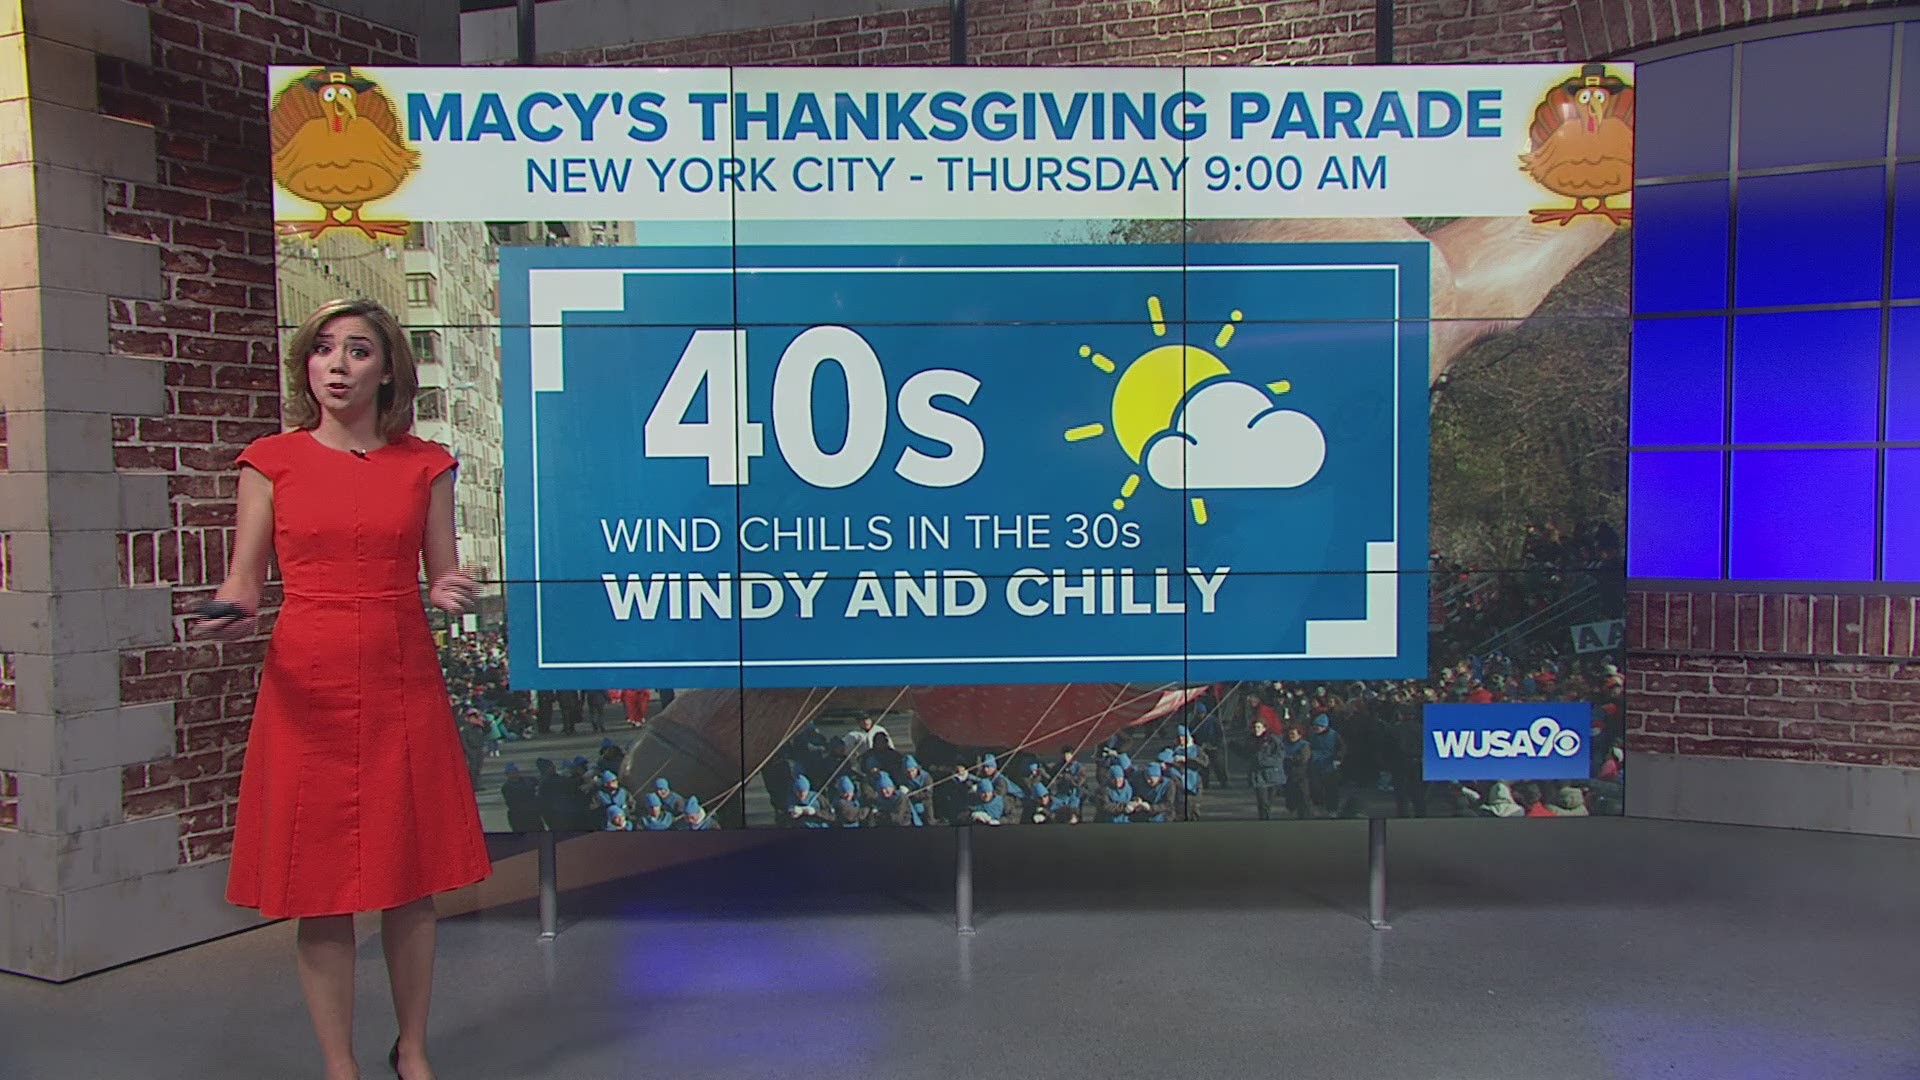 Strong winds are in the forecast for this year's Macy's Thanksgiving Day Parade